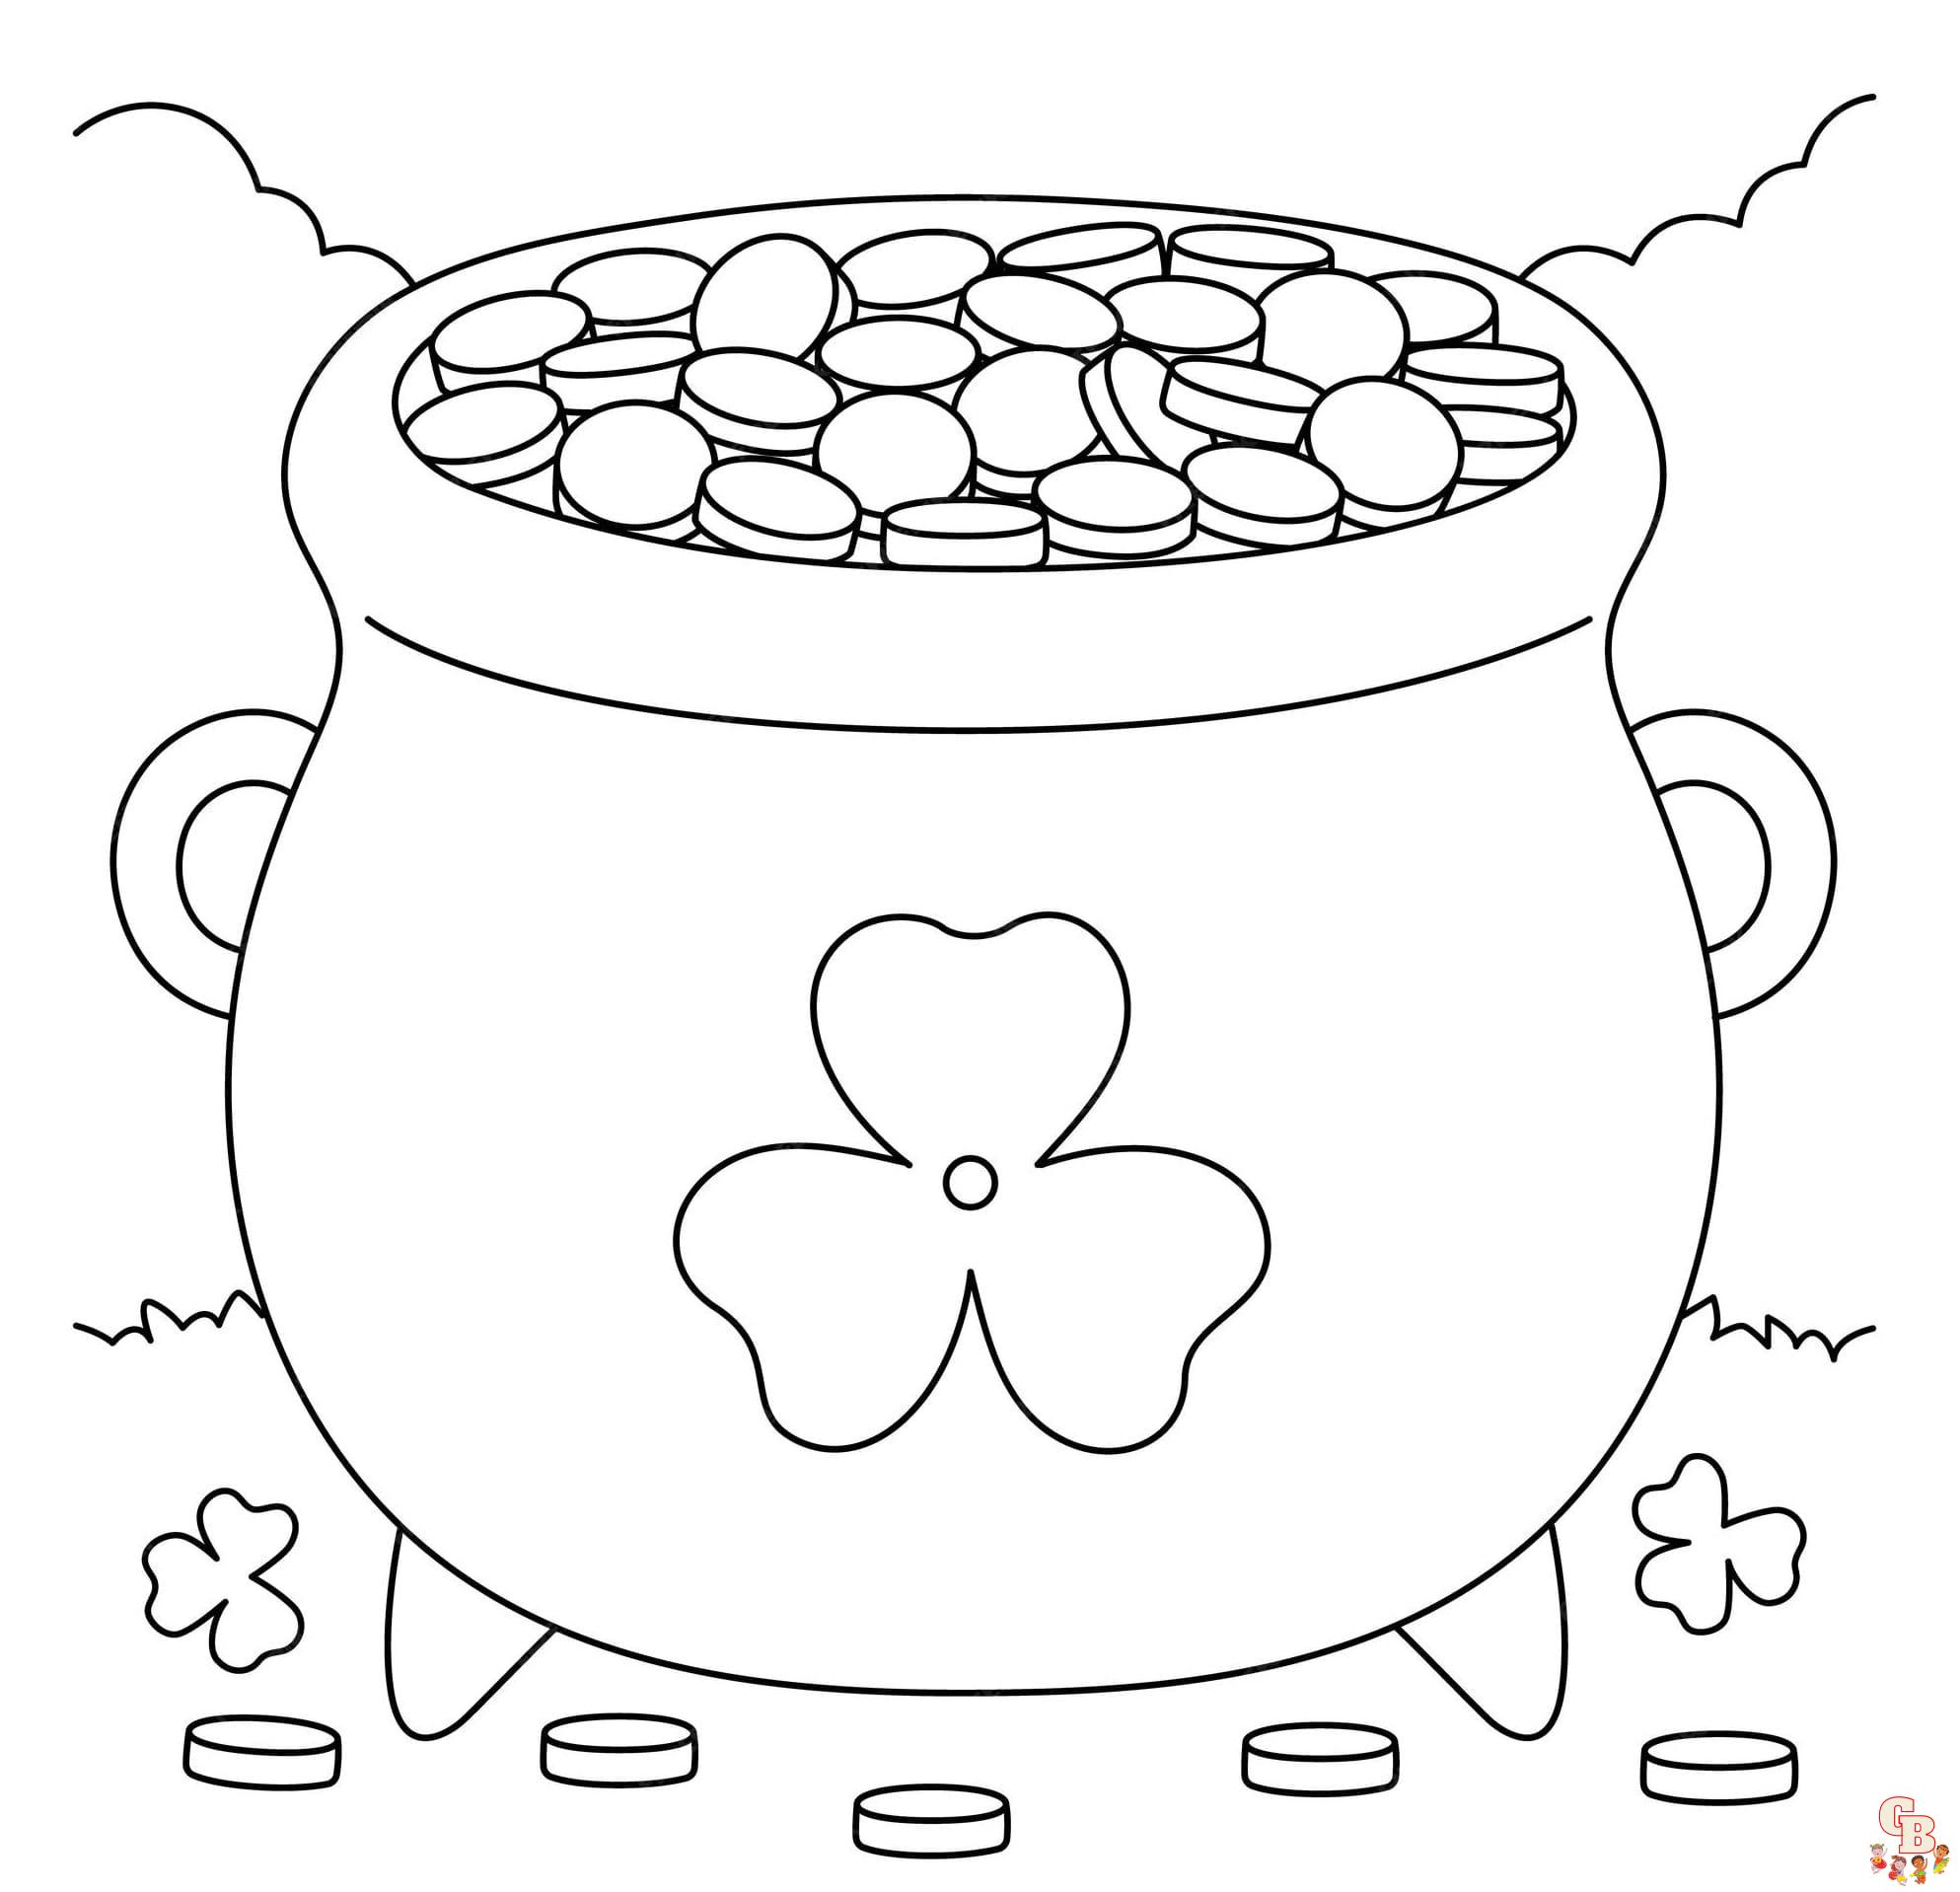 Printable pot of gold coloring pages free for kids and adults